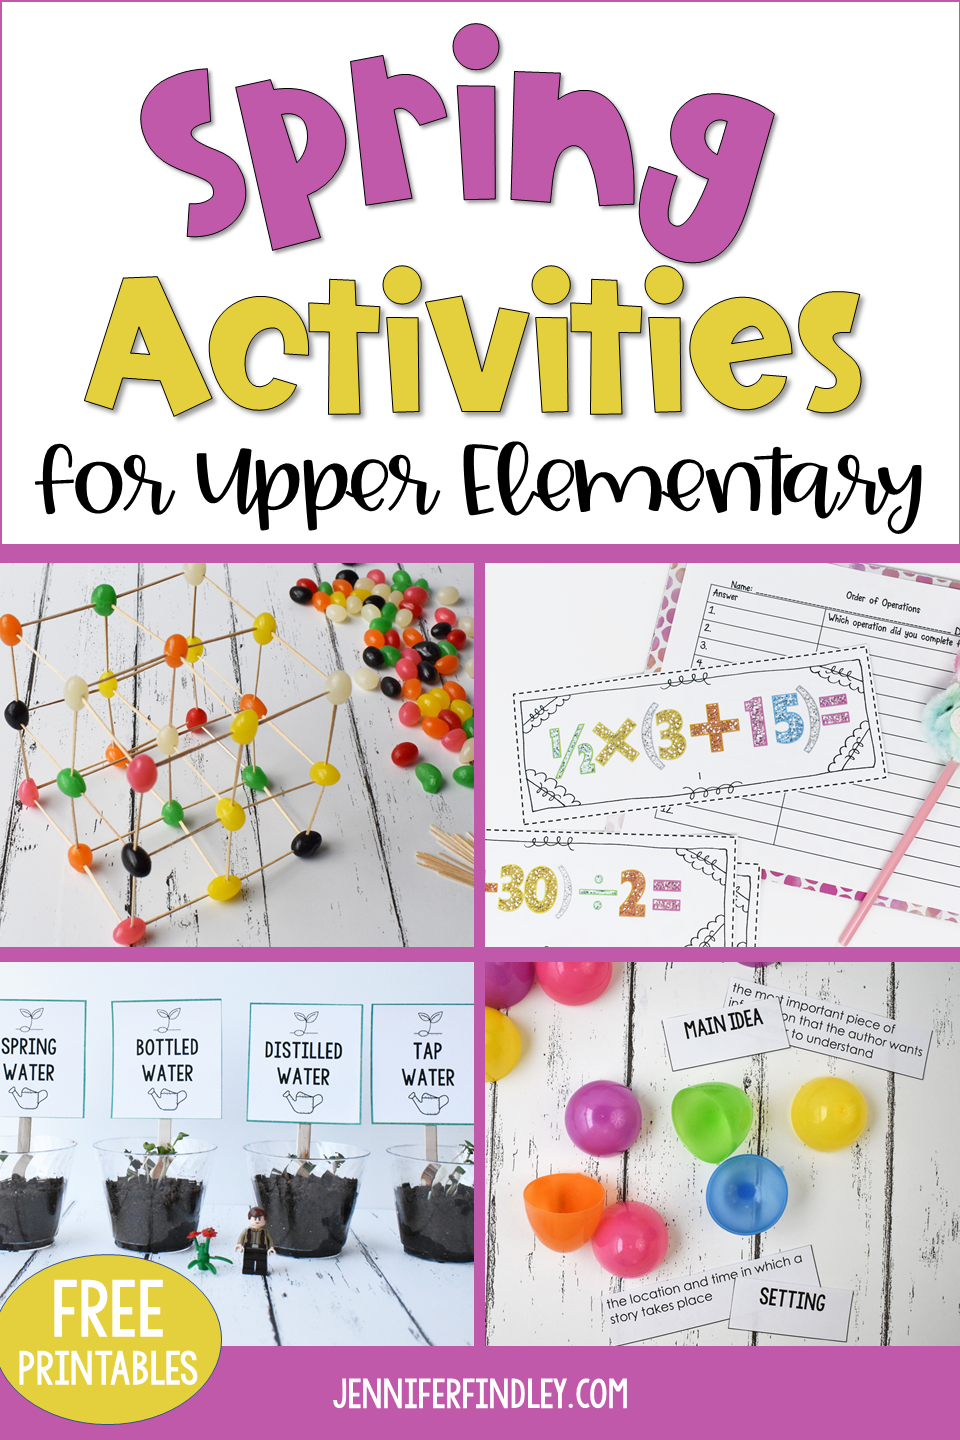 April and May are the perfect months to incorporate engaging and rigorous spring activities to motivate your students (and sneak in some test prep). This post shares several freebies and other resources for upper elementary.